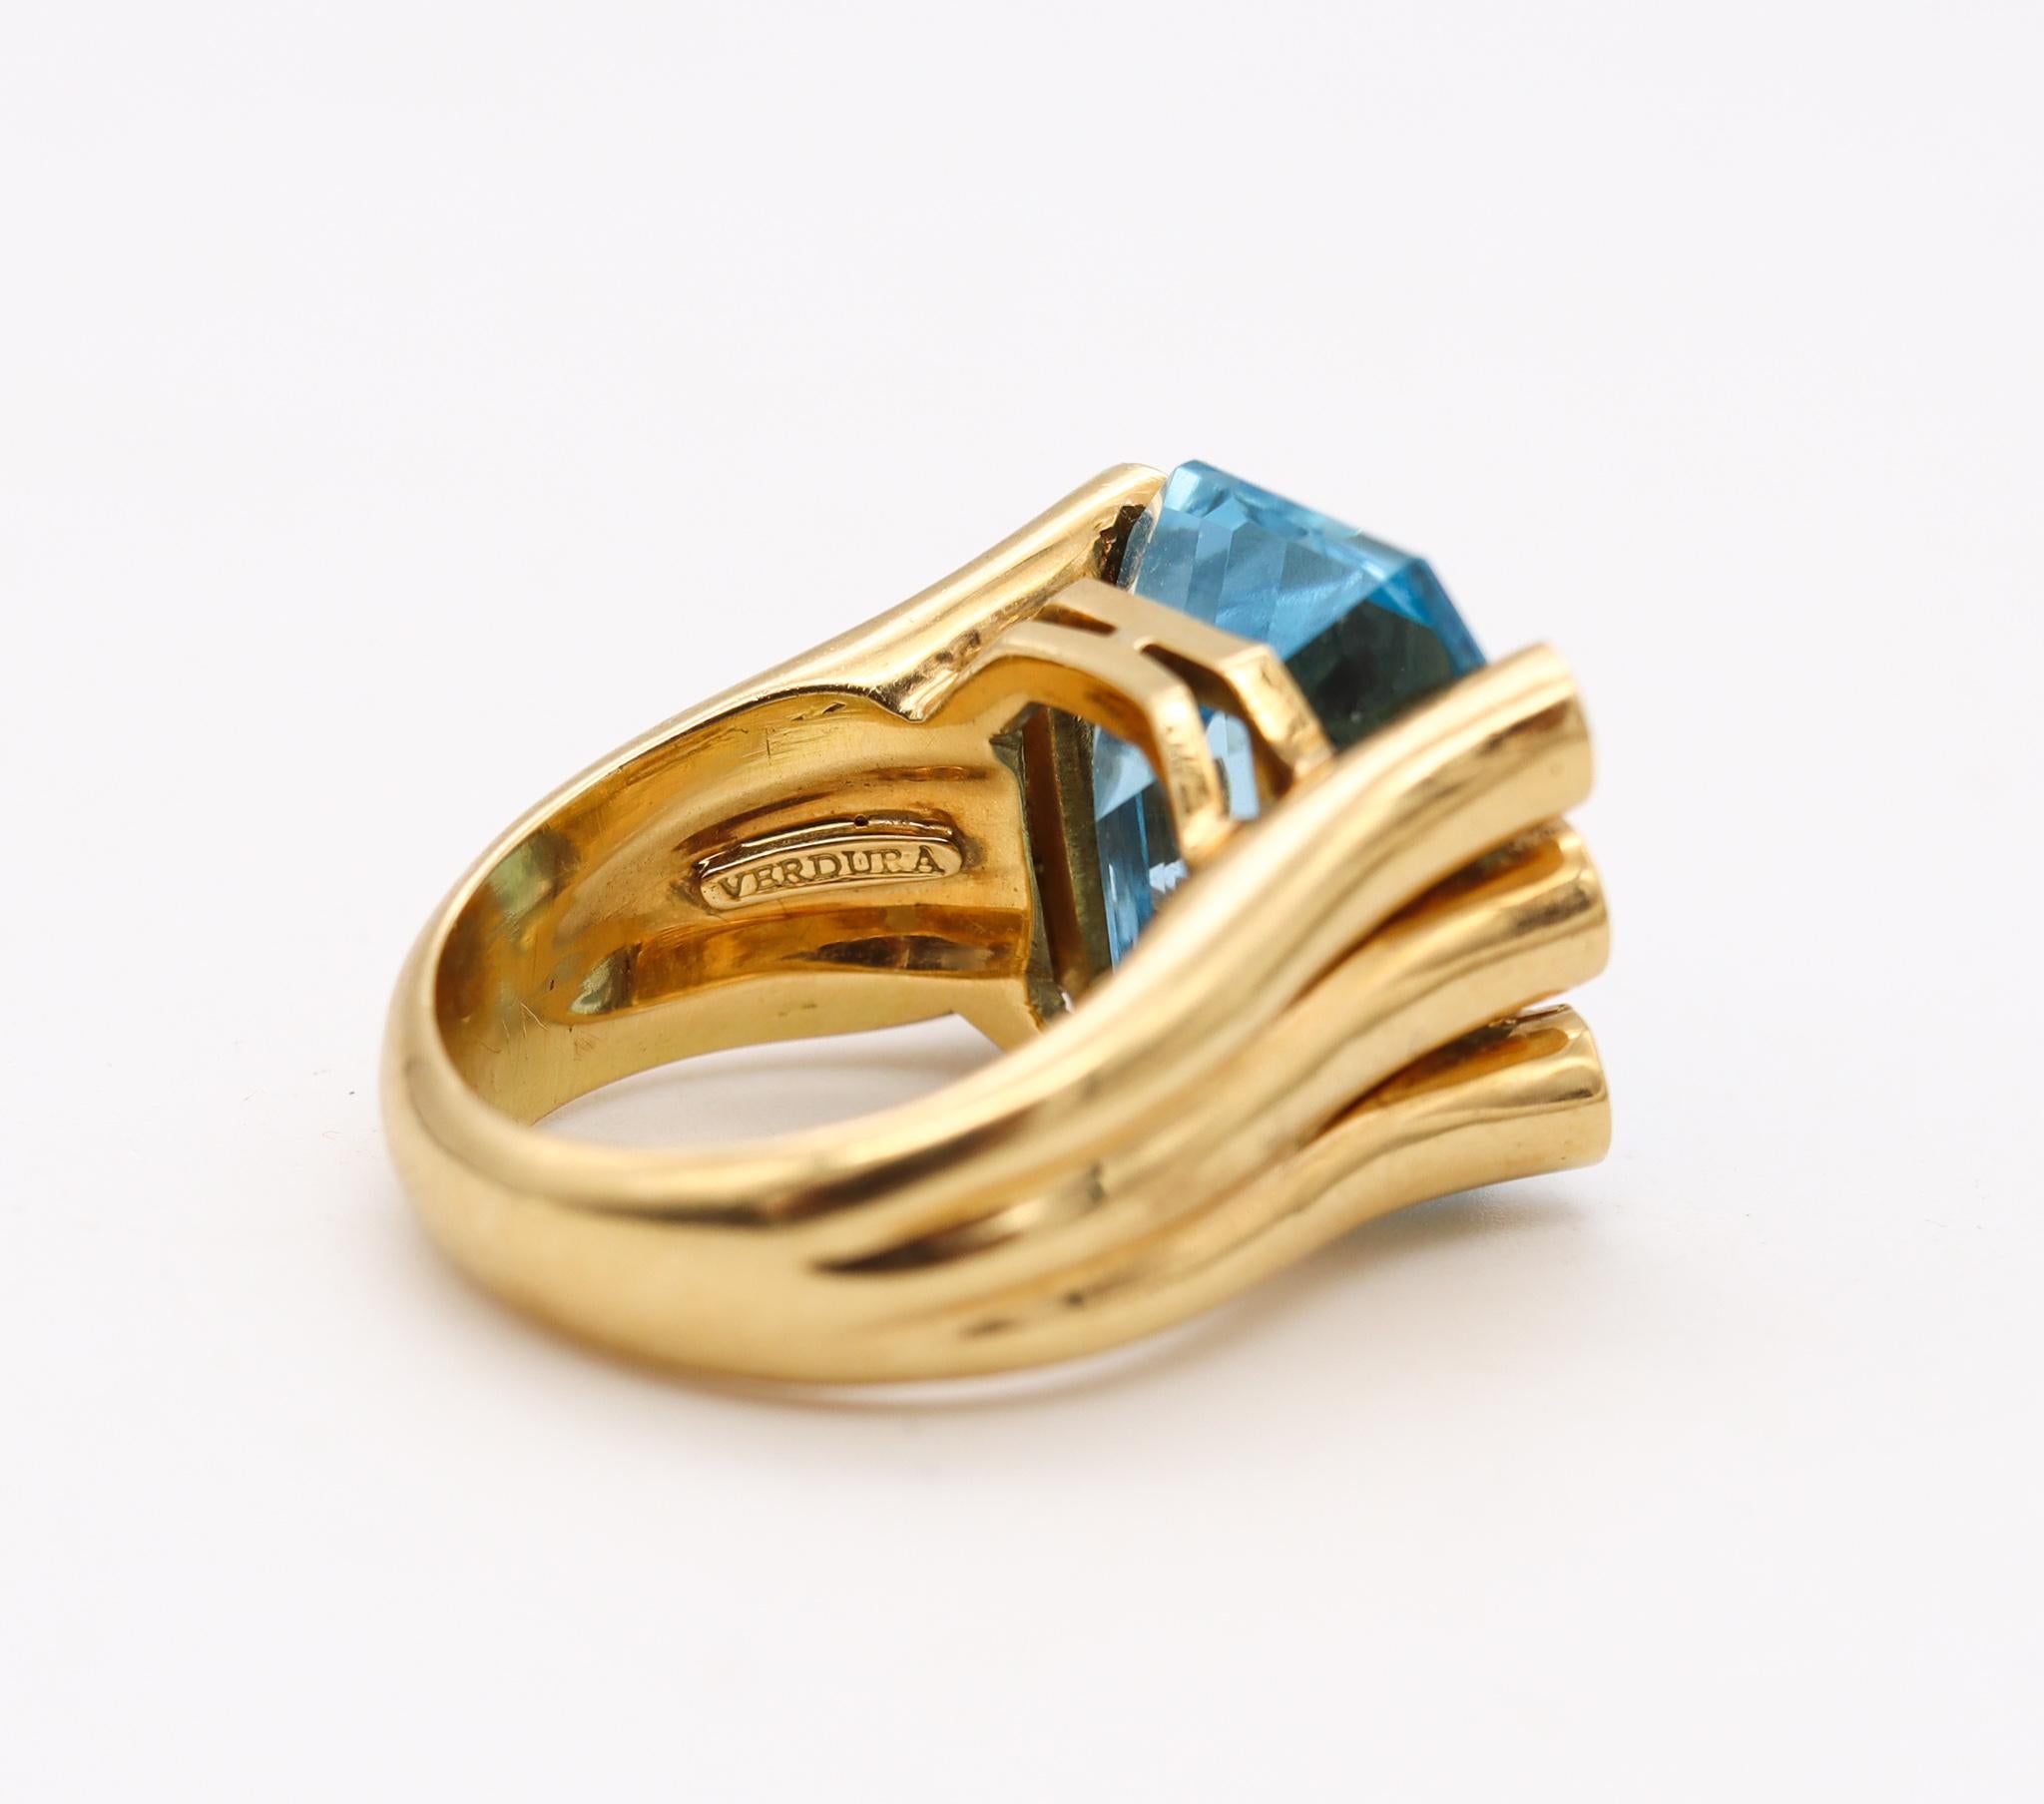 Modern Verdura Milan Cocktail Ring in 18kt Gold with 12.31 Cts in Aquamarine & Diamonds